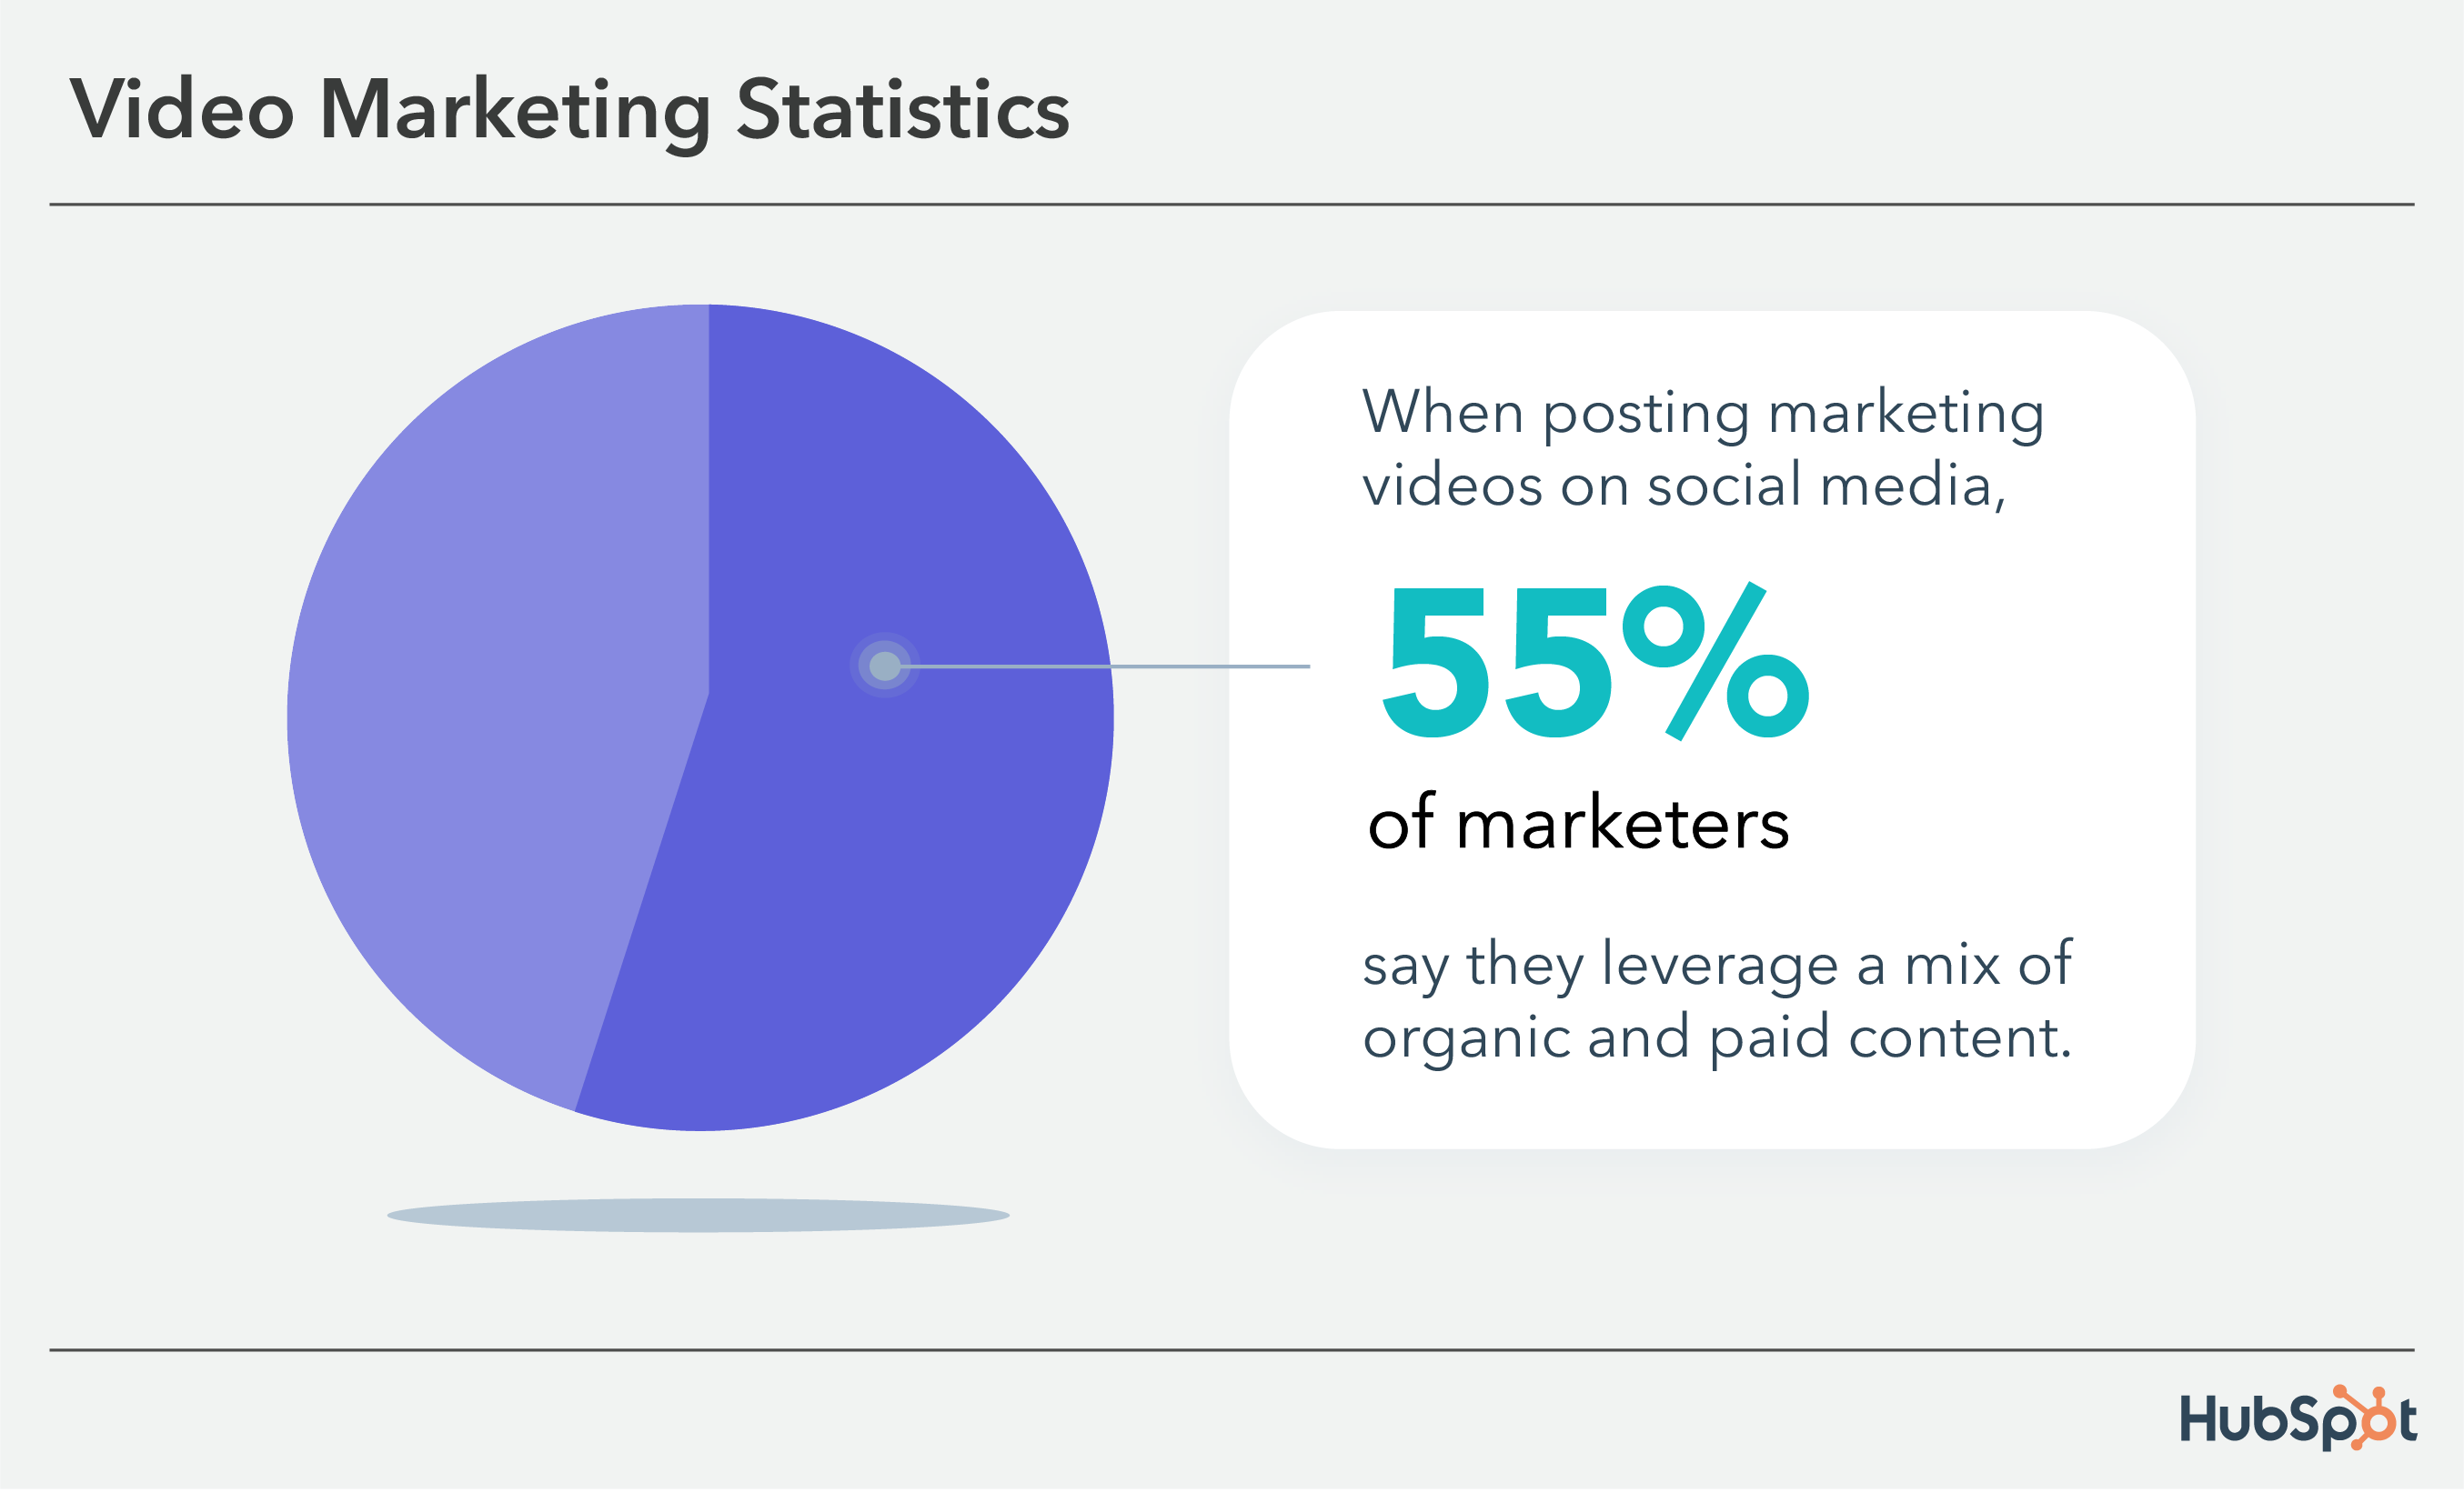 Video Marketing Statistics: 55% of marketers use a mix of organic and paid content.